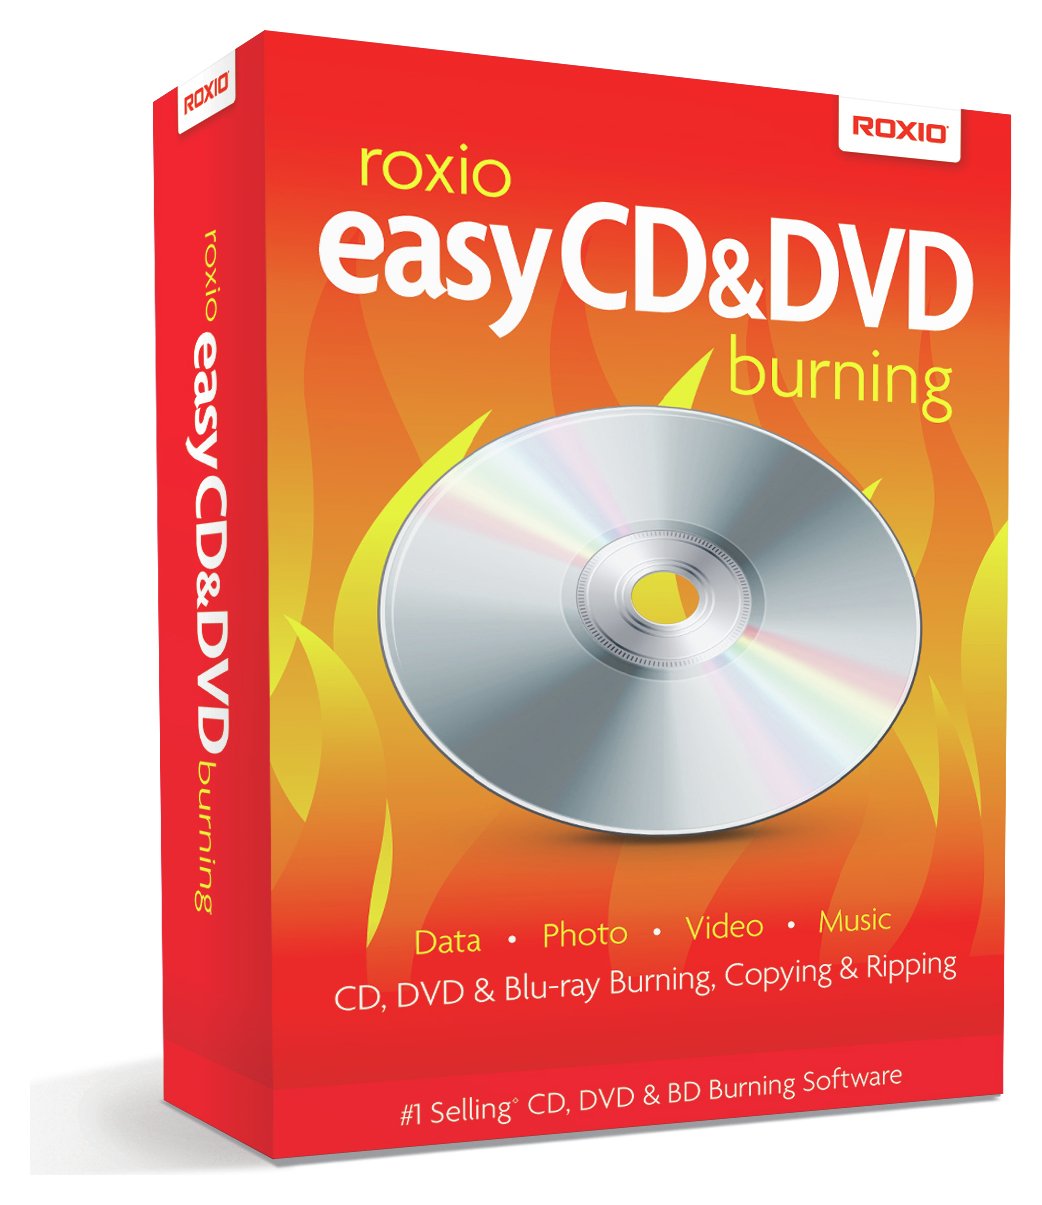 Roxio - Easy CD and DVD Burning PC Software Review